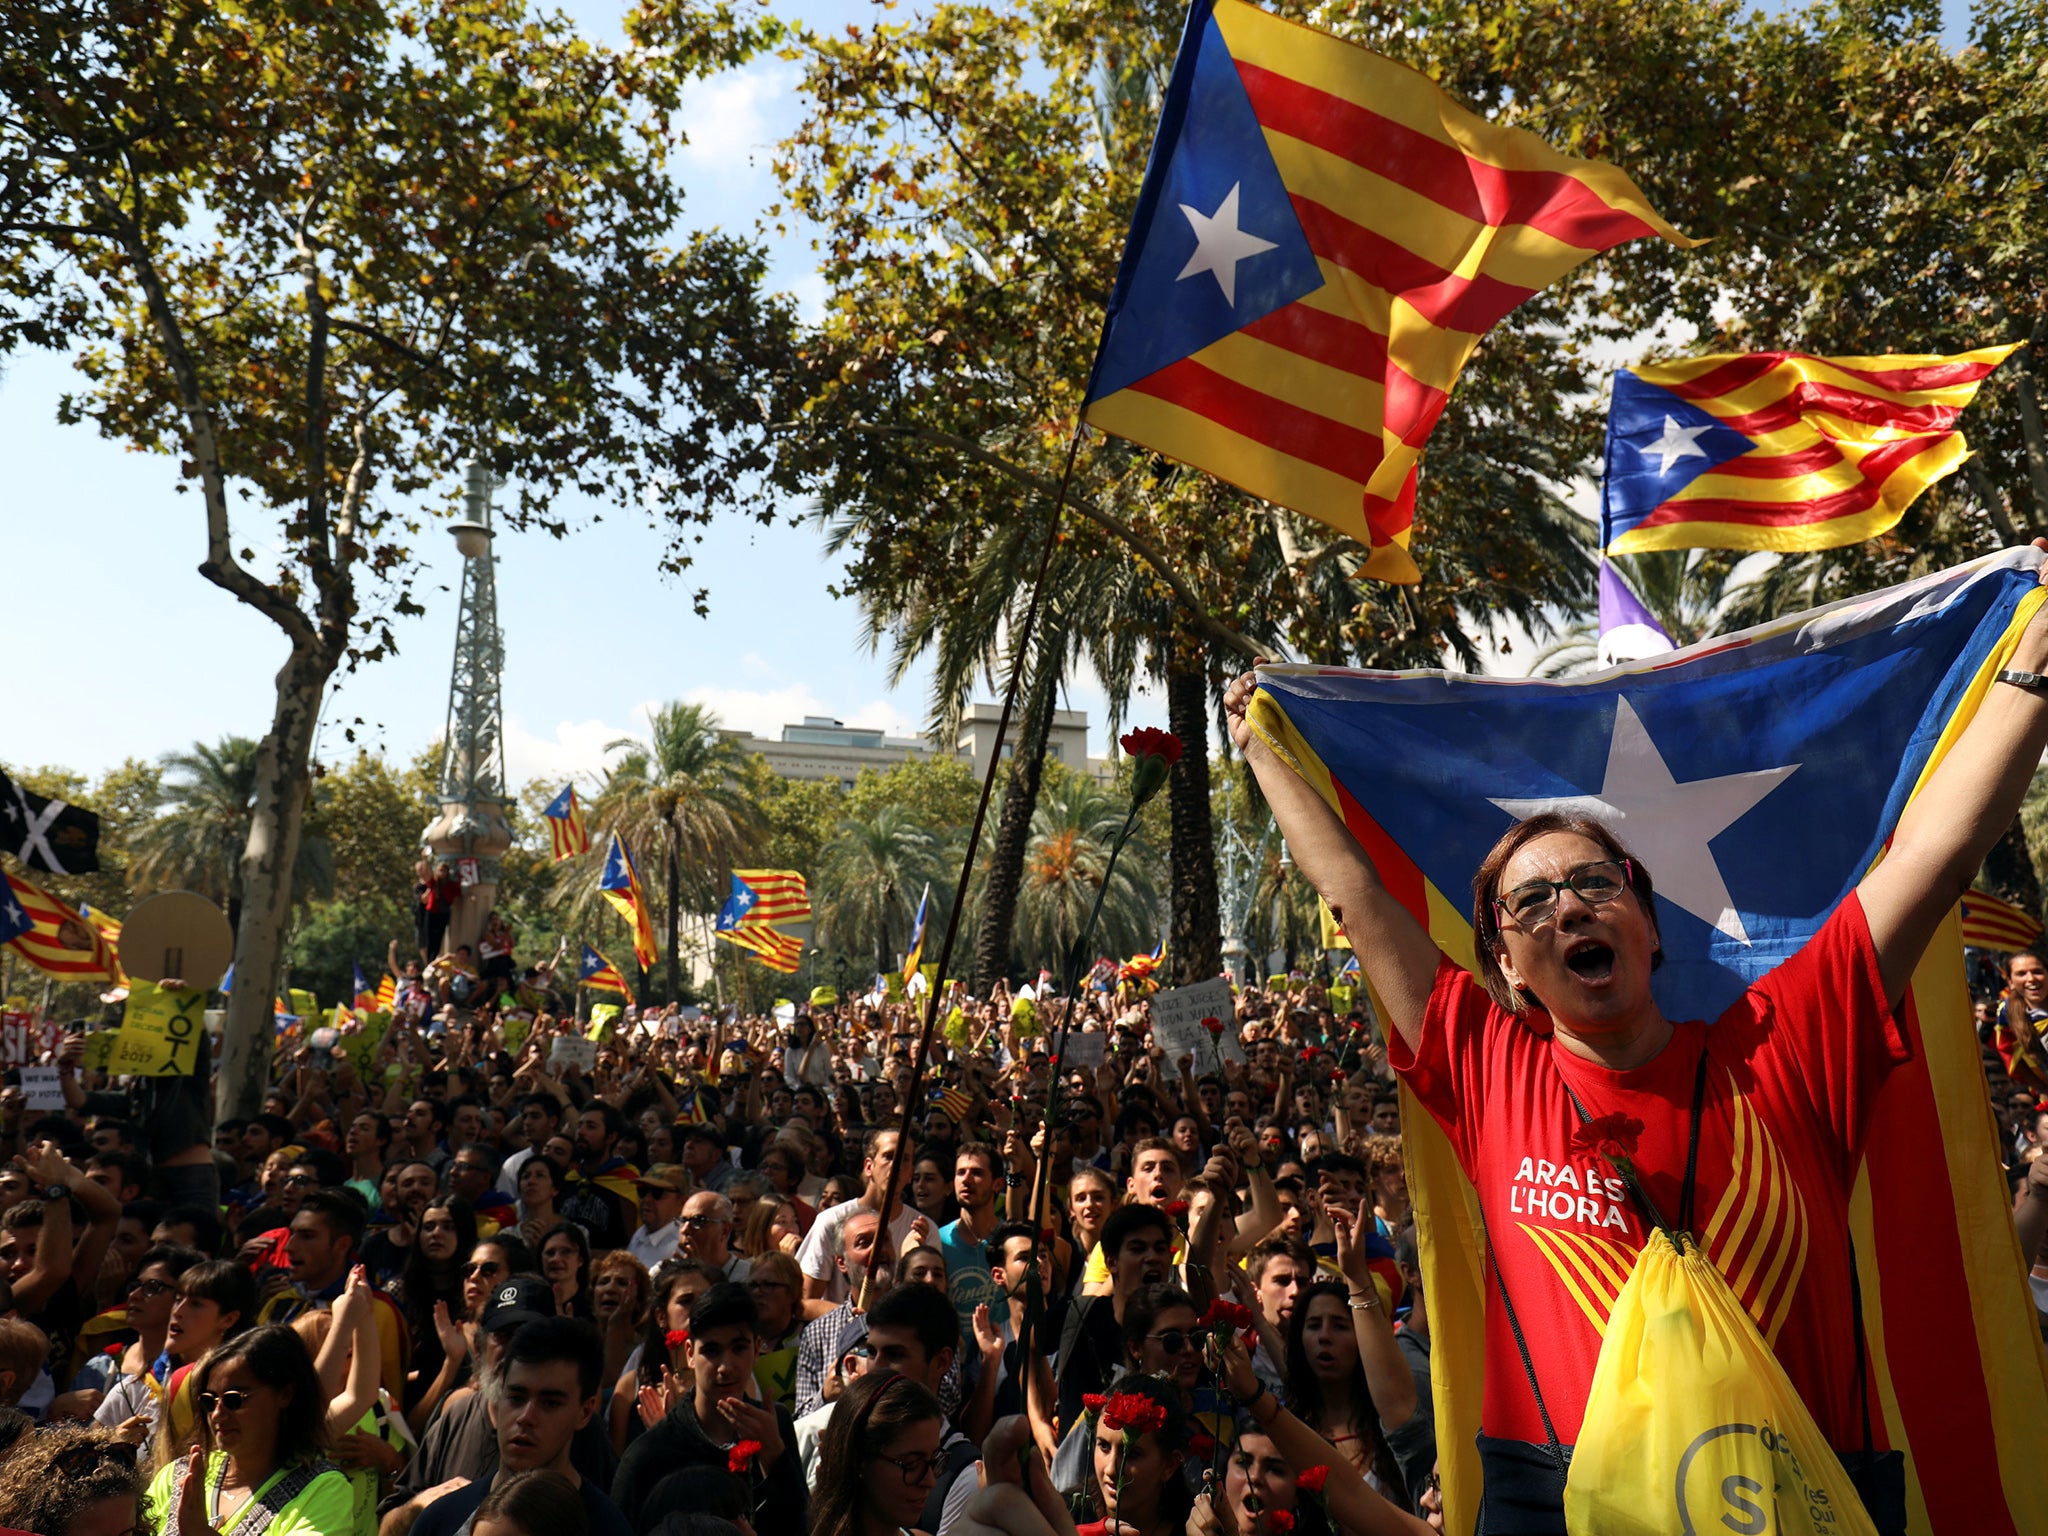 Protesters wave Catalan separatist flags outside the High Court of Justice of Catalonia in Barcelona